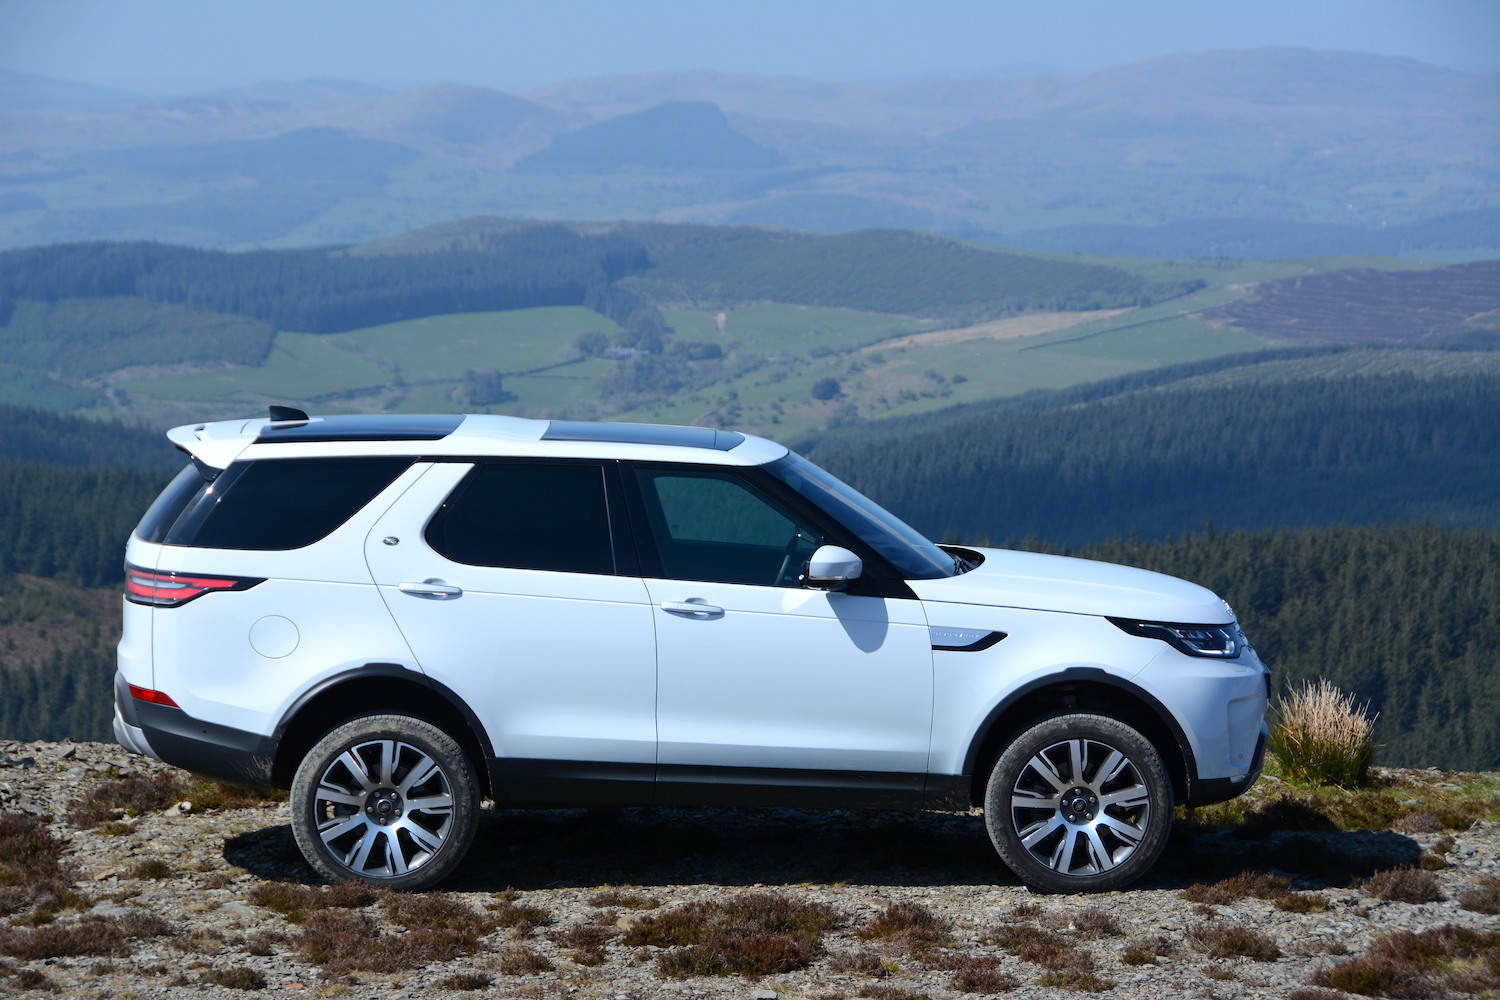 land rover discovery review uk